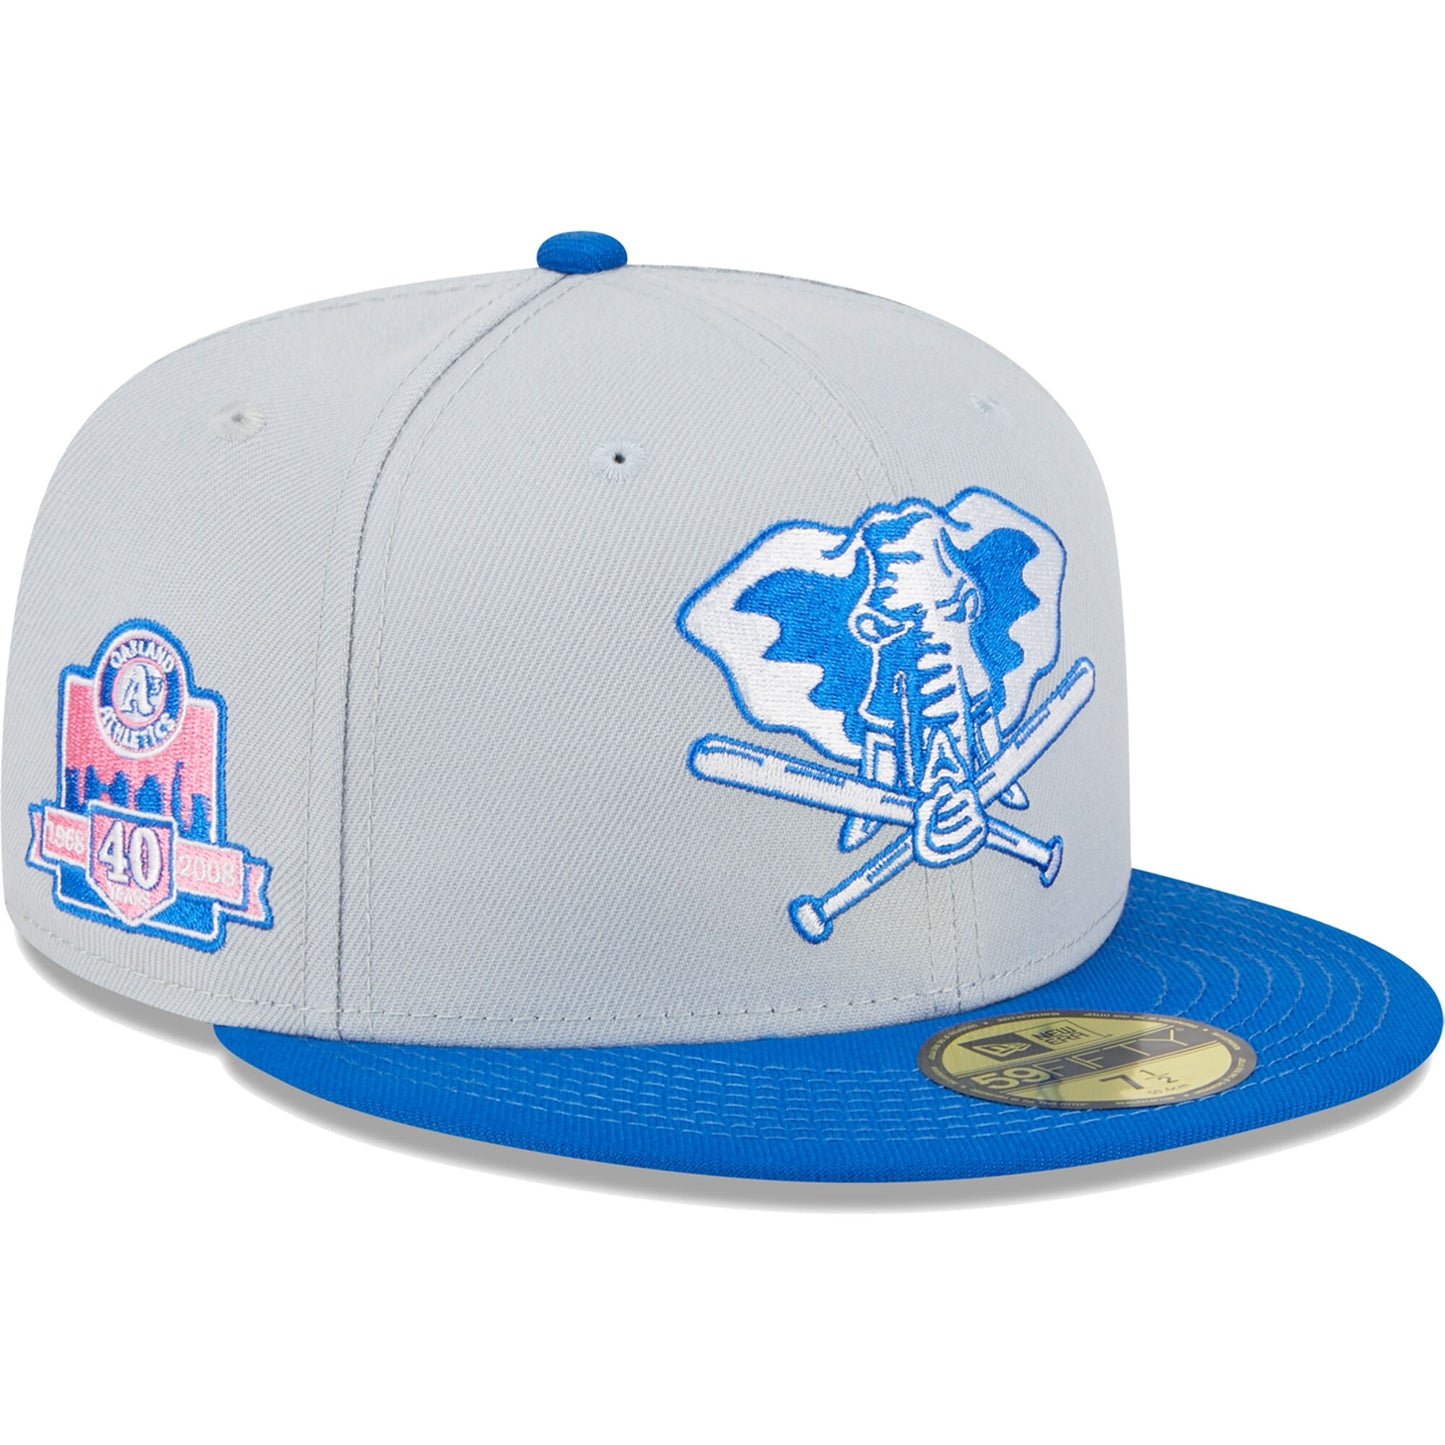 Oakland Athletics New Era Dolphin 59FIFTY Fitted Hat - Gray/Blue